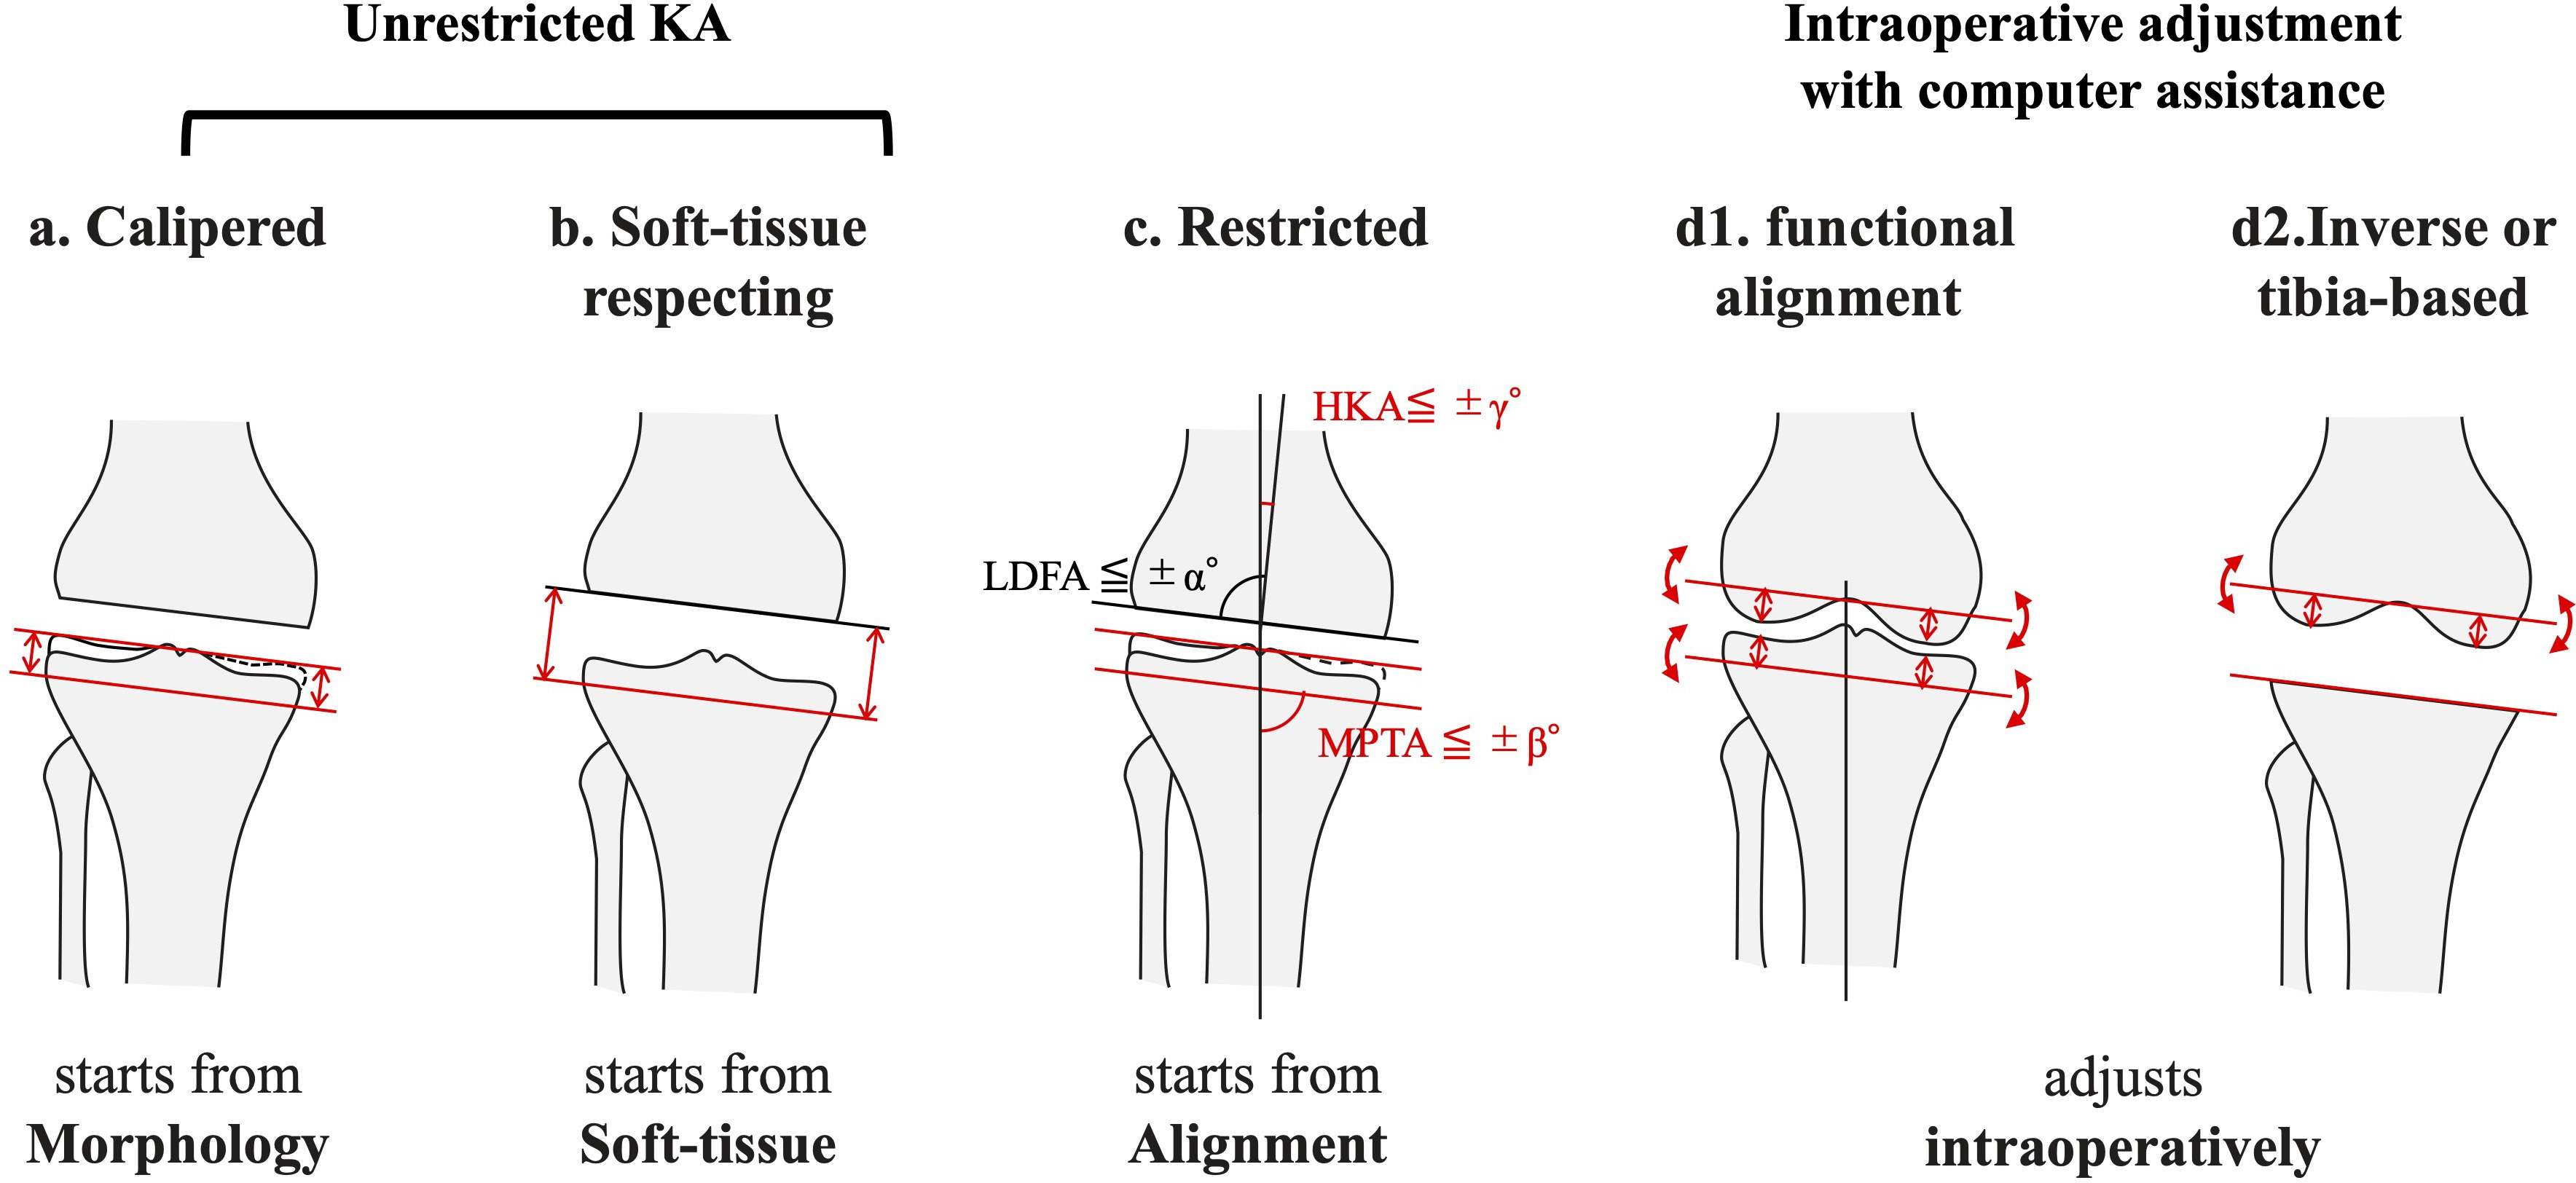 Fig. 3 
            The variation of deciding the tibial cutting surface in the kinematic alignment total knee arthroplasties (KA-TKAs). a) Calipered (or pure, true) KA technique. The tibia is cut parallel to the tibial articular surface, compensating for the cartilage wear, similar to the femoral side. b) Soft-tissue respecting technique. The tibia is cut parallel to the femoral cutting surface under proper traction, parallel to the distal cutting surface of the femur in extension with respect to the trial component, and parallel to the posterior cutting surface of the femur in flexion. The calipered and soft-tissue respecting approaches are categorized as unrestricted KA. c) Restricted KA technique. A similar bone cut is done within the safe range (e.g. < 5° varus); otherwise, the resection is performed at a defined angle. Intraoperative adjustment with computer assistance: d1) Functional alignment. The tibial cutting surface along with the femoral cutting surface is decided based on the intraoperative information, including alignment and gap under computer assistance. d2). Inverse kinematic alignment or tibia-based KA. In this technique, the alignment of tibial component is decided first, followed by that of femoral component. Note that the femoral cutting line can be altered in these techniques. HKA, hip-knee-ankle angle; LDFA, lateral distal femoral angle; MPTA, medial proximal tibial angle.
          